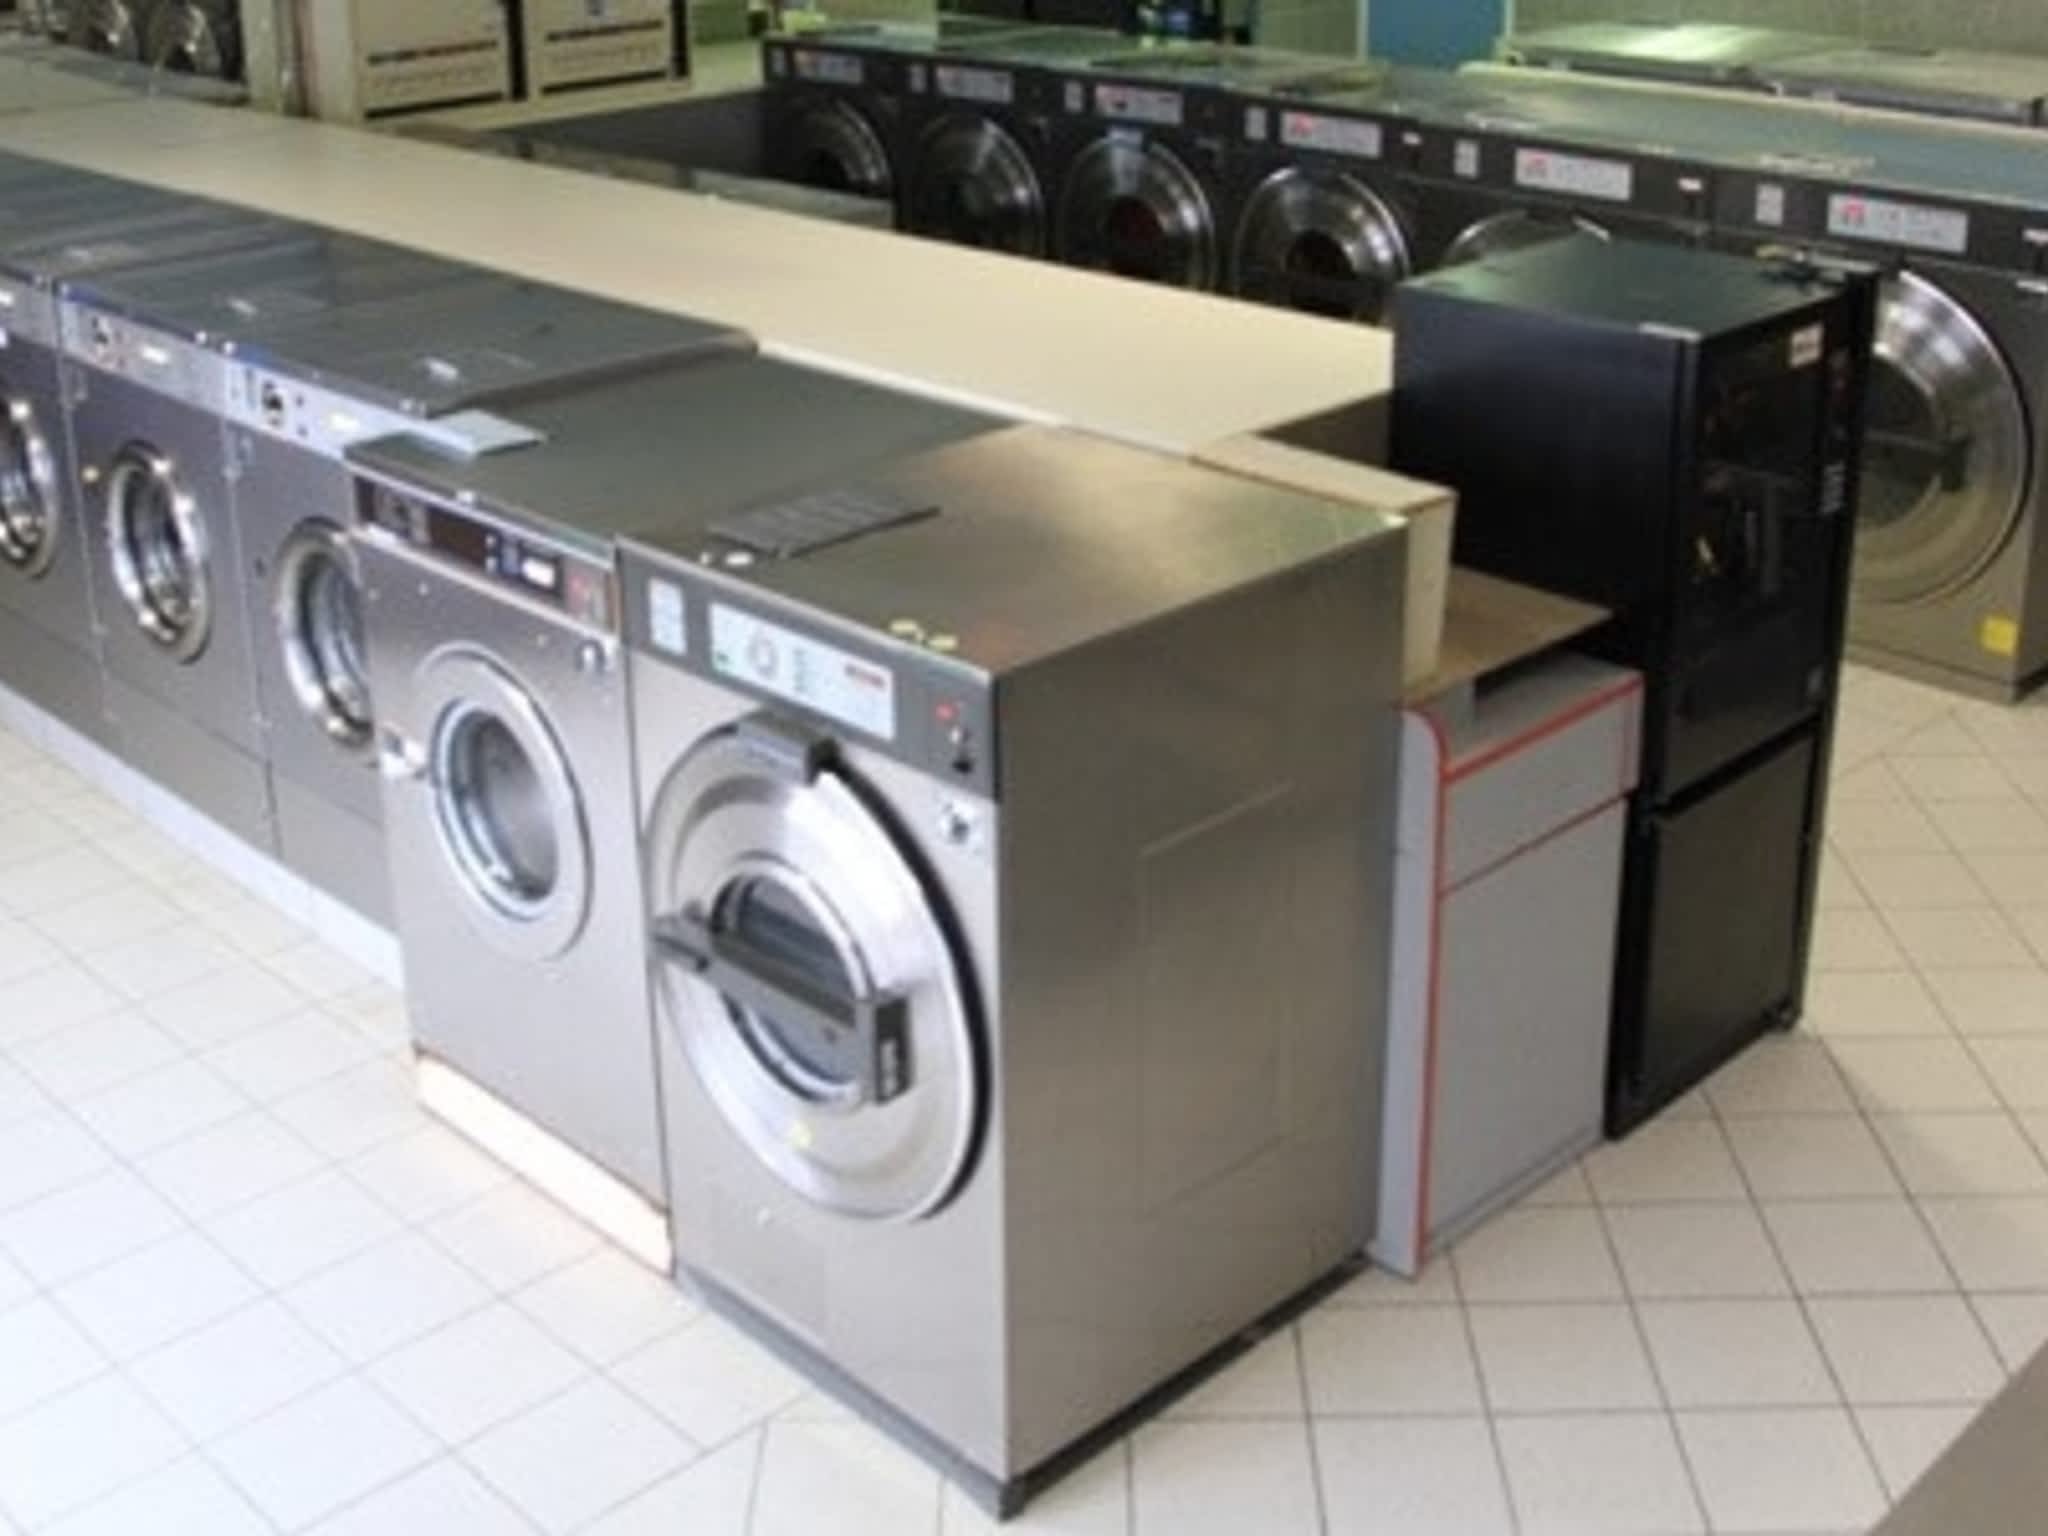 24 hour laundromat tampa